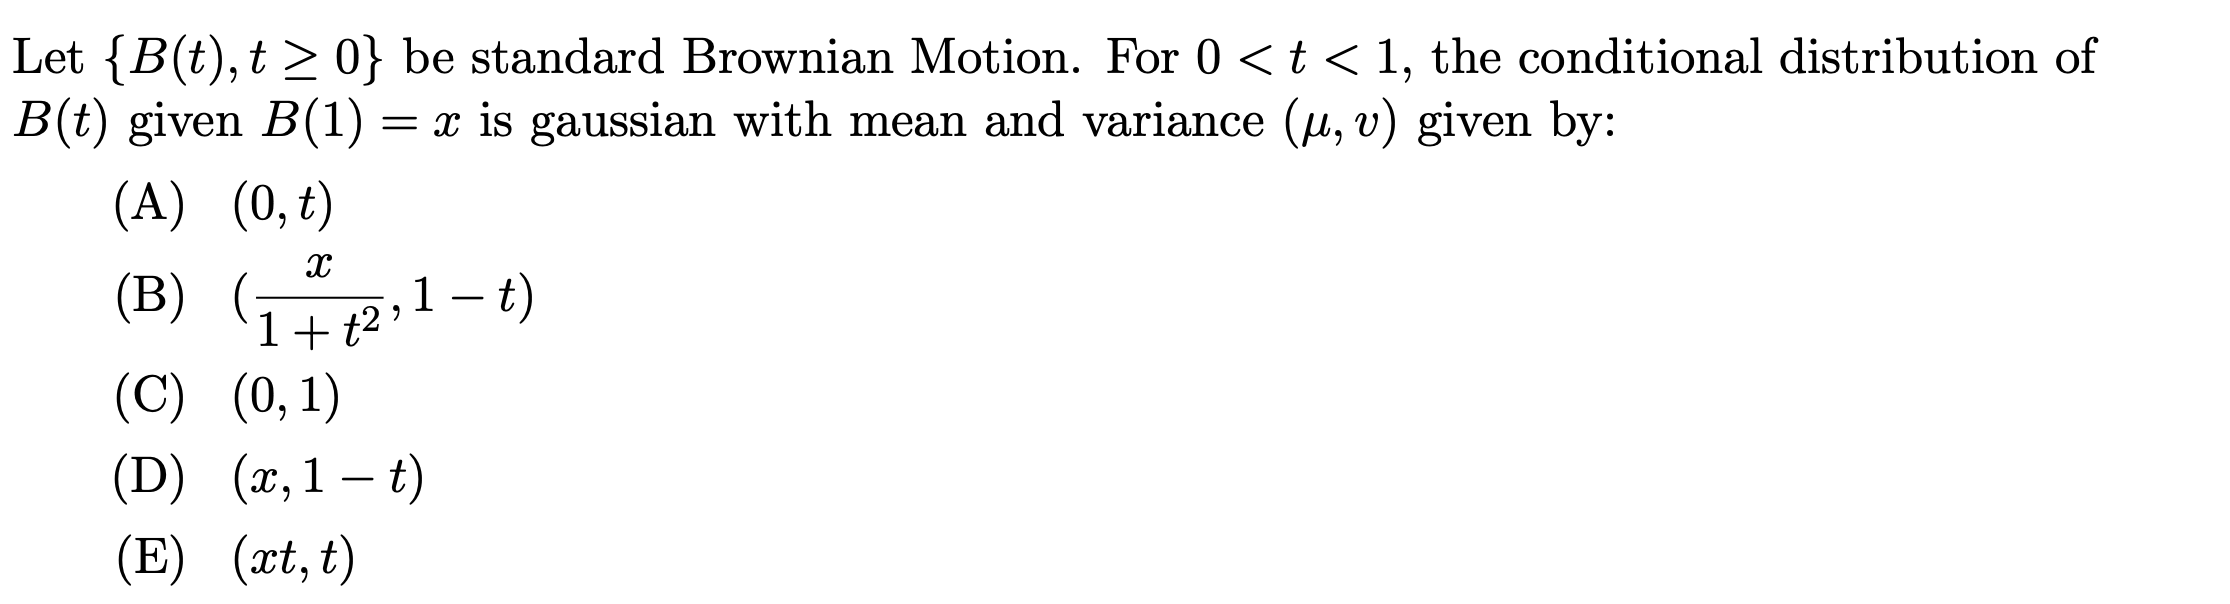 Let {B(t), t > 0} be standard Brownian Motion. For 0 <t< 1, the conditional distribution of B(t) given B(1) = x is gaussian w